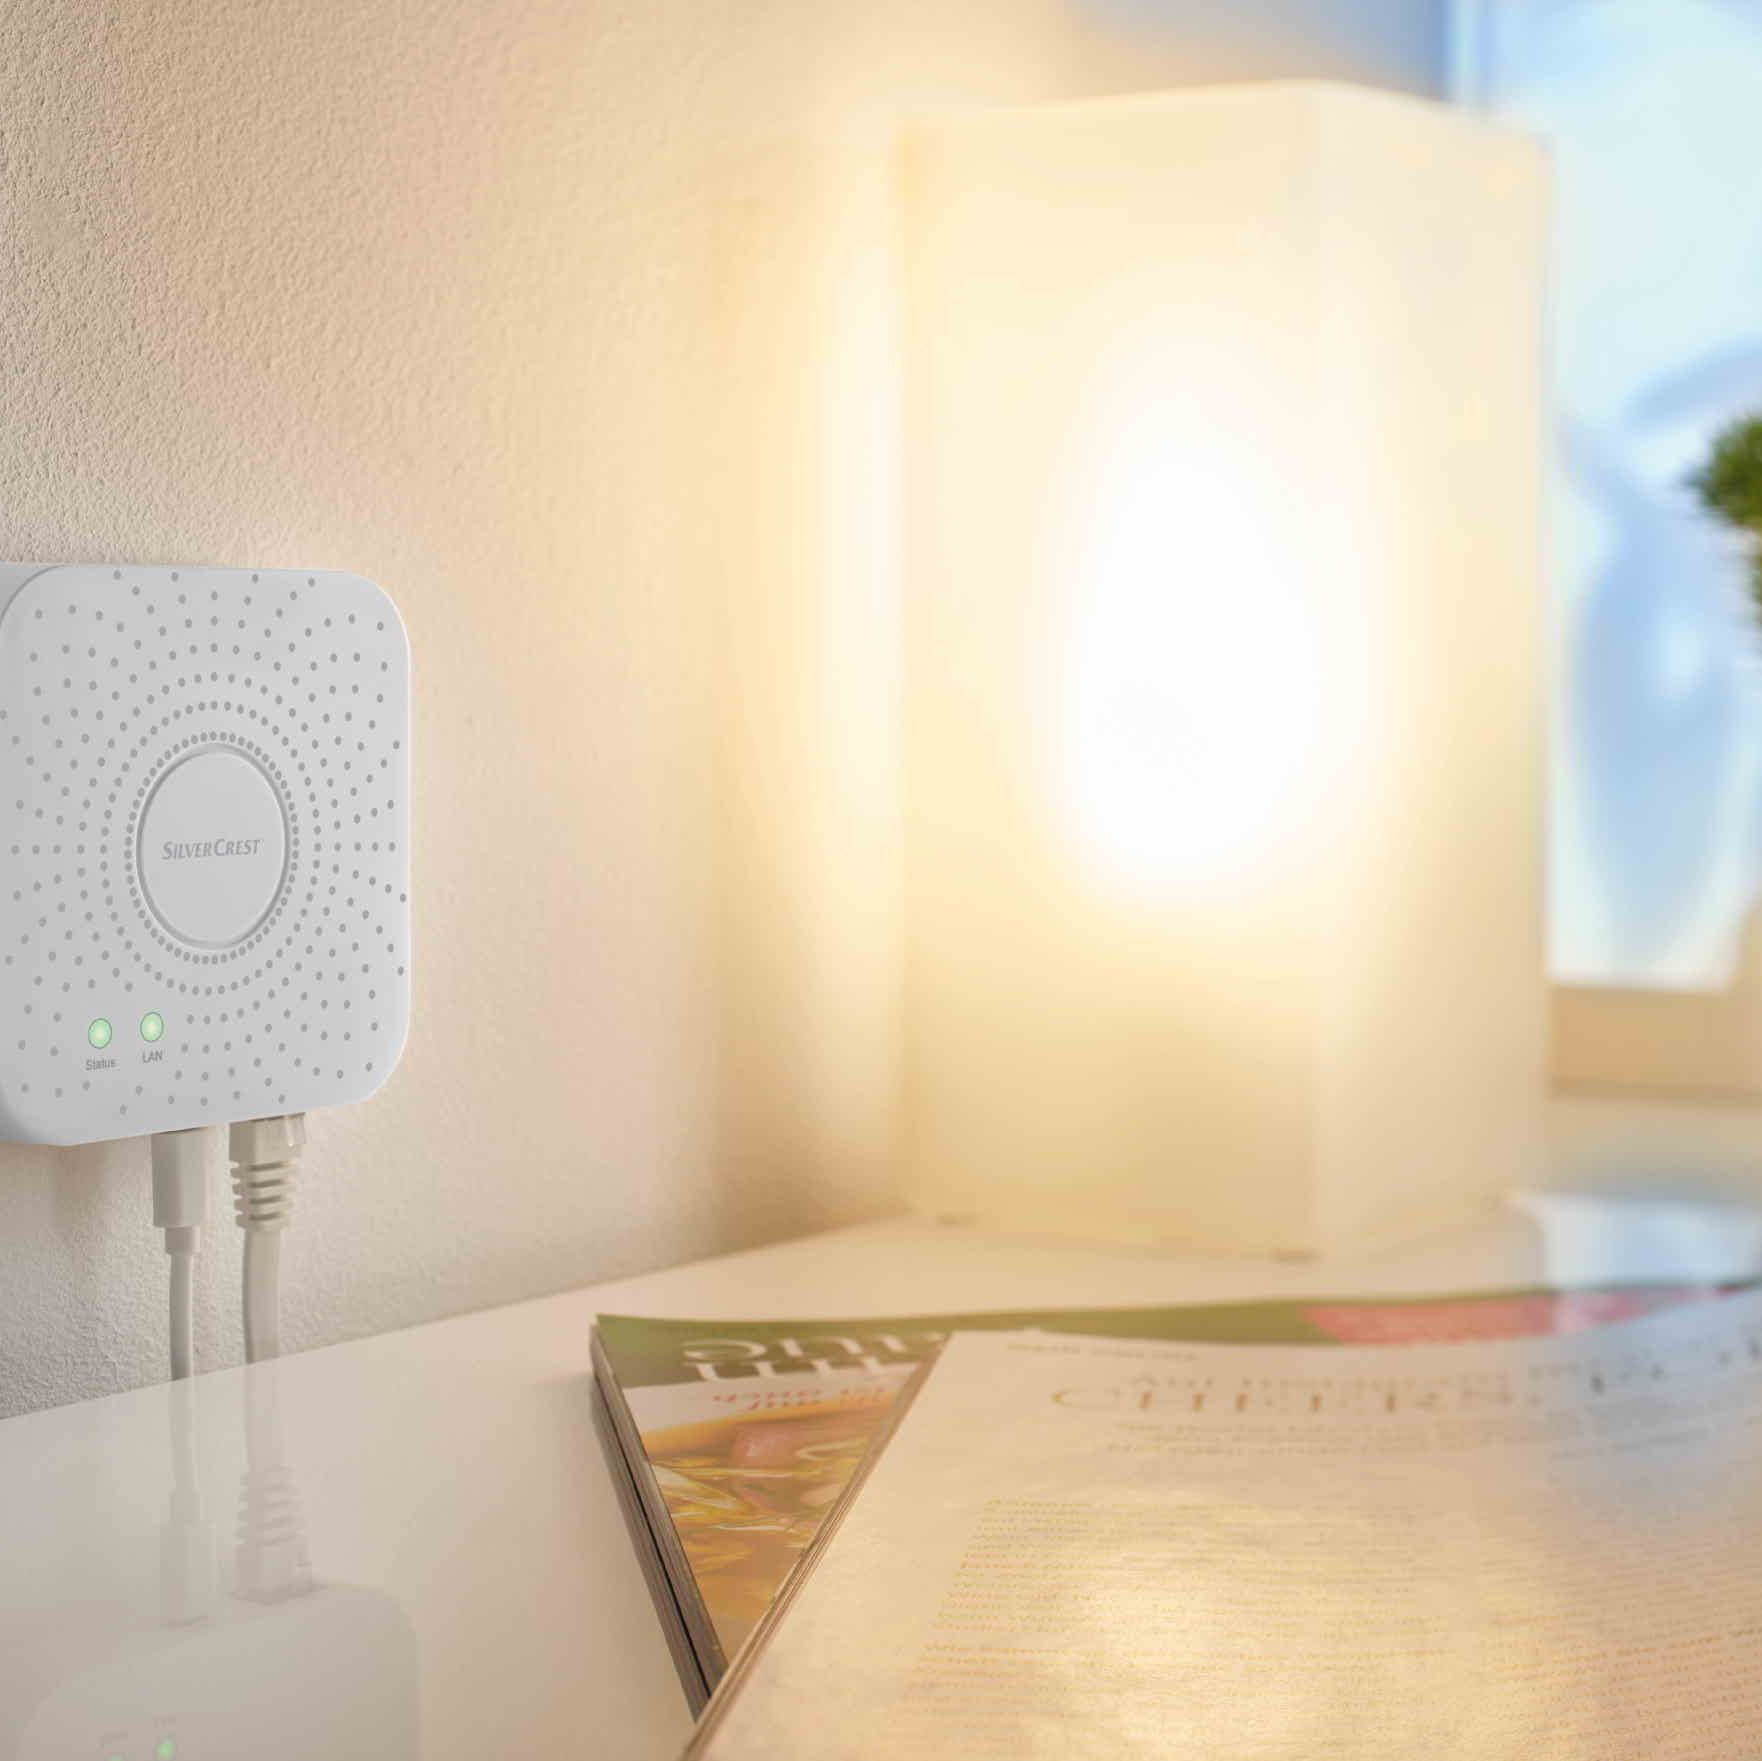 Lidl's Smart Home Range Starts From Just £7.99 - Lidl Offers